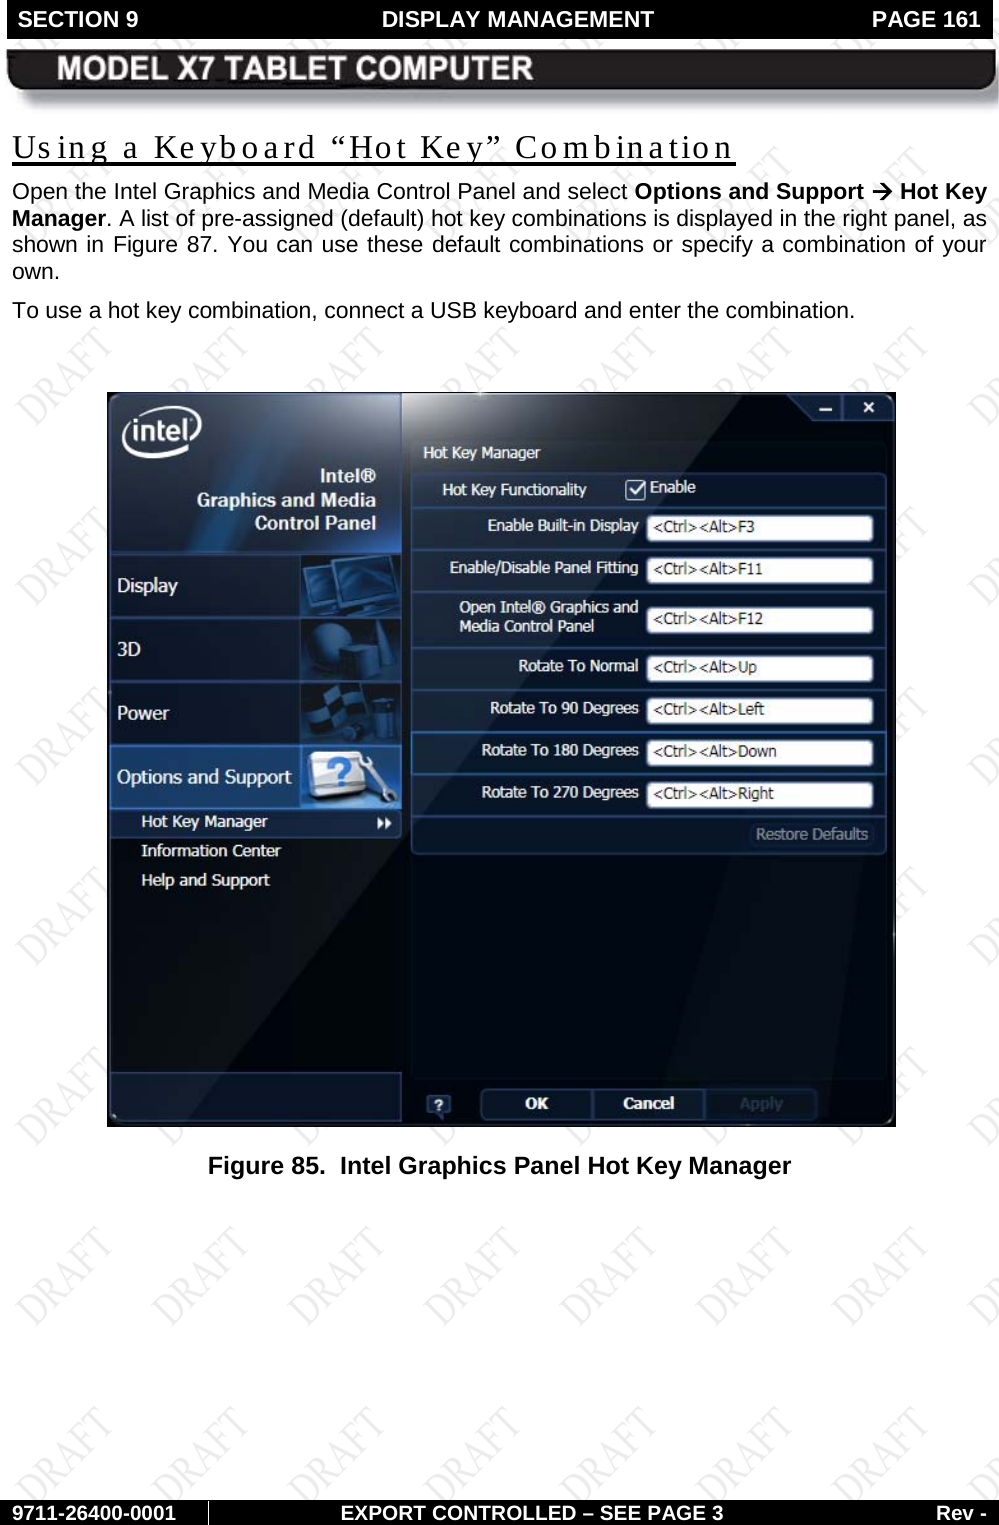 SECTION 9  DISPLAY MANAGEMENT  PAGE 161        9711-26400-0001 EXPORT CONTROLLED – SEE PAGE 3 Rev - Us ing a Keyboard “Hot Key” Combination Open the Intel Graphics and Media Control Panel and select Options and Support à Hot Key Manager. A list of pre-assigned (default) hot key combinations is displayed in the right panel, as shown in Figure 87. You can use these default combinations or specify a combination of your own.  To use a hot key combination, connect a USB keyboard and enter the combination.   Figure 85.  Intel Graphics Panel Hot Key Manager   